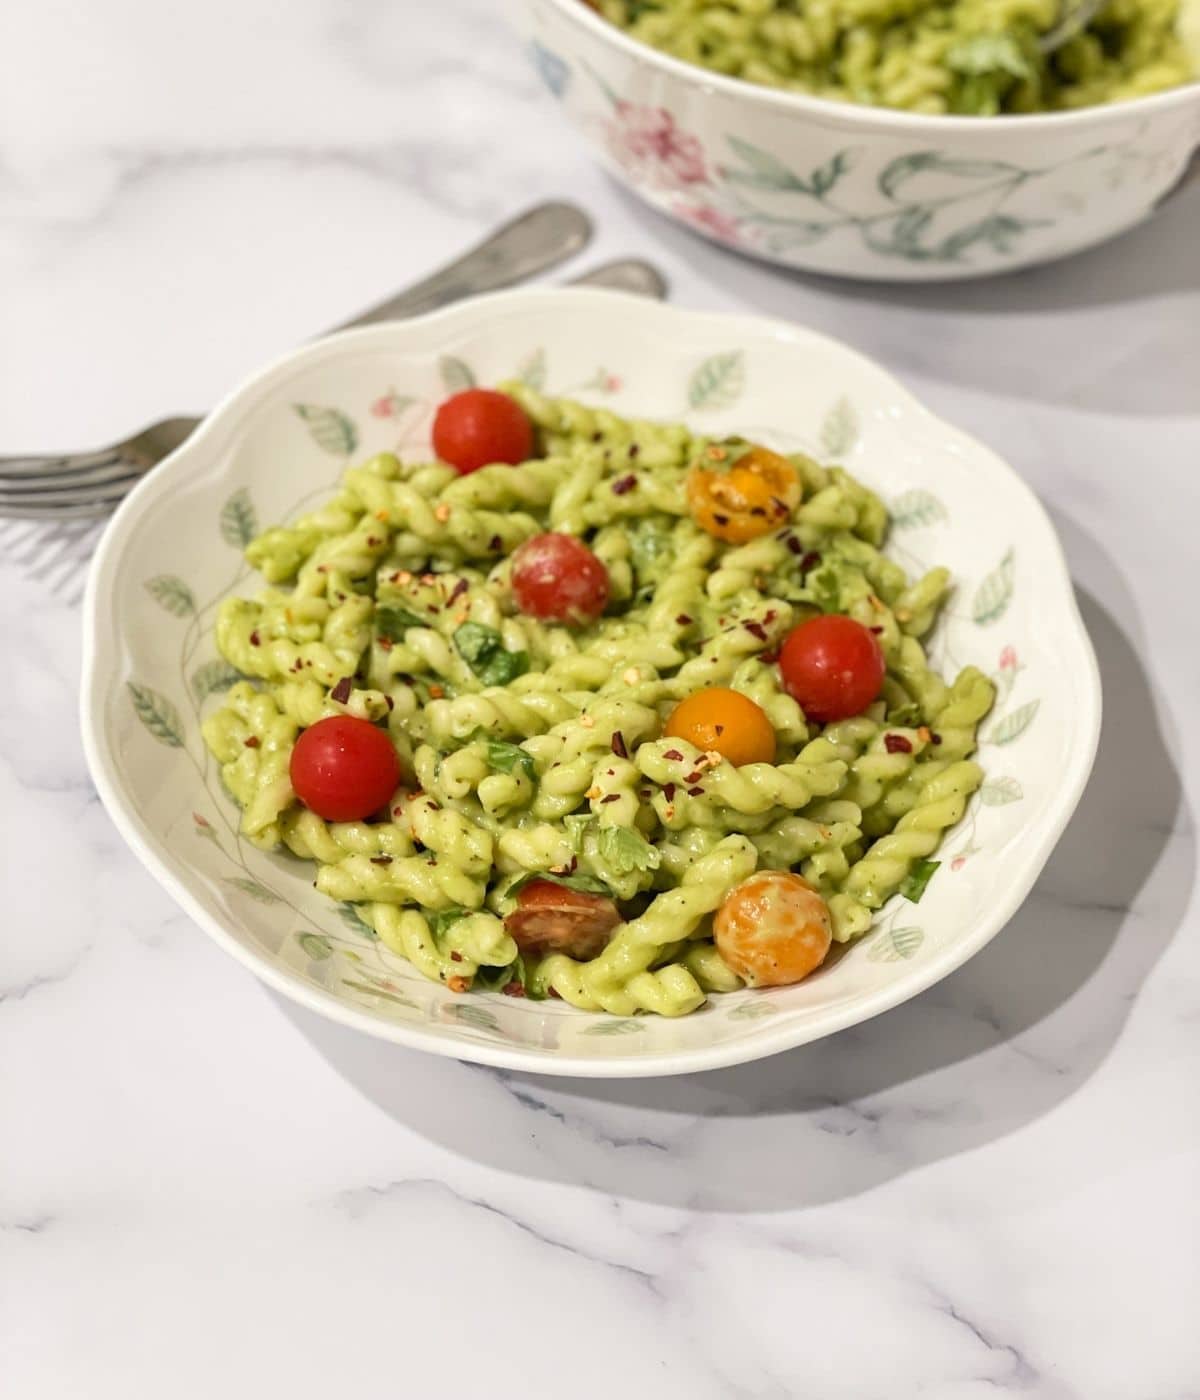 A plate of creamy avocado pasta is on the table with fork on the side.